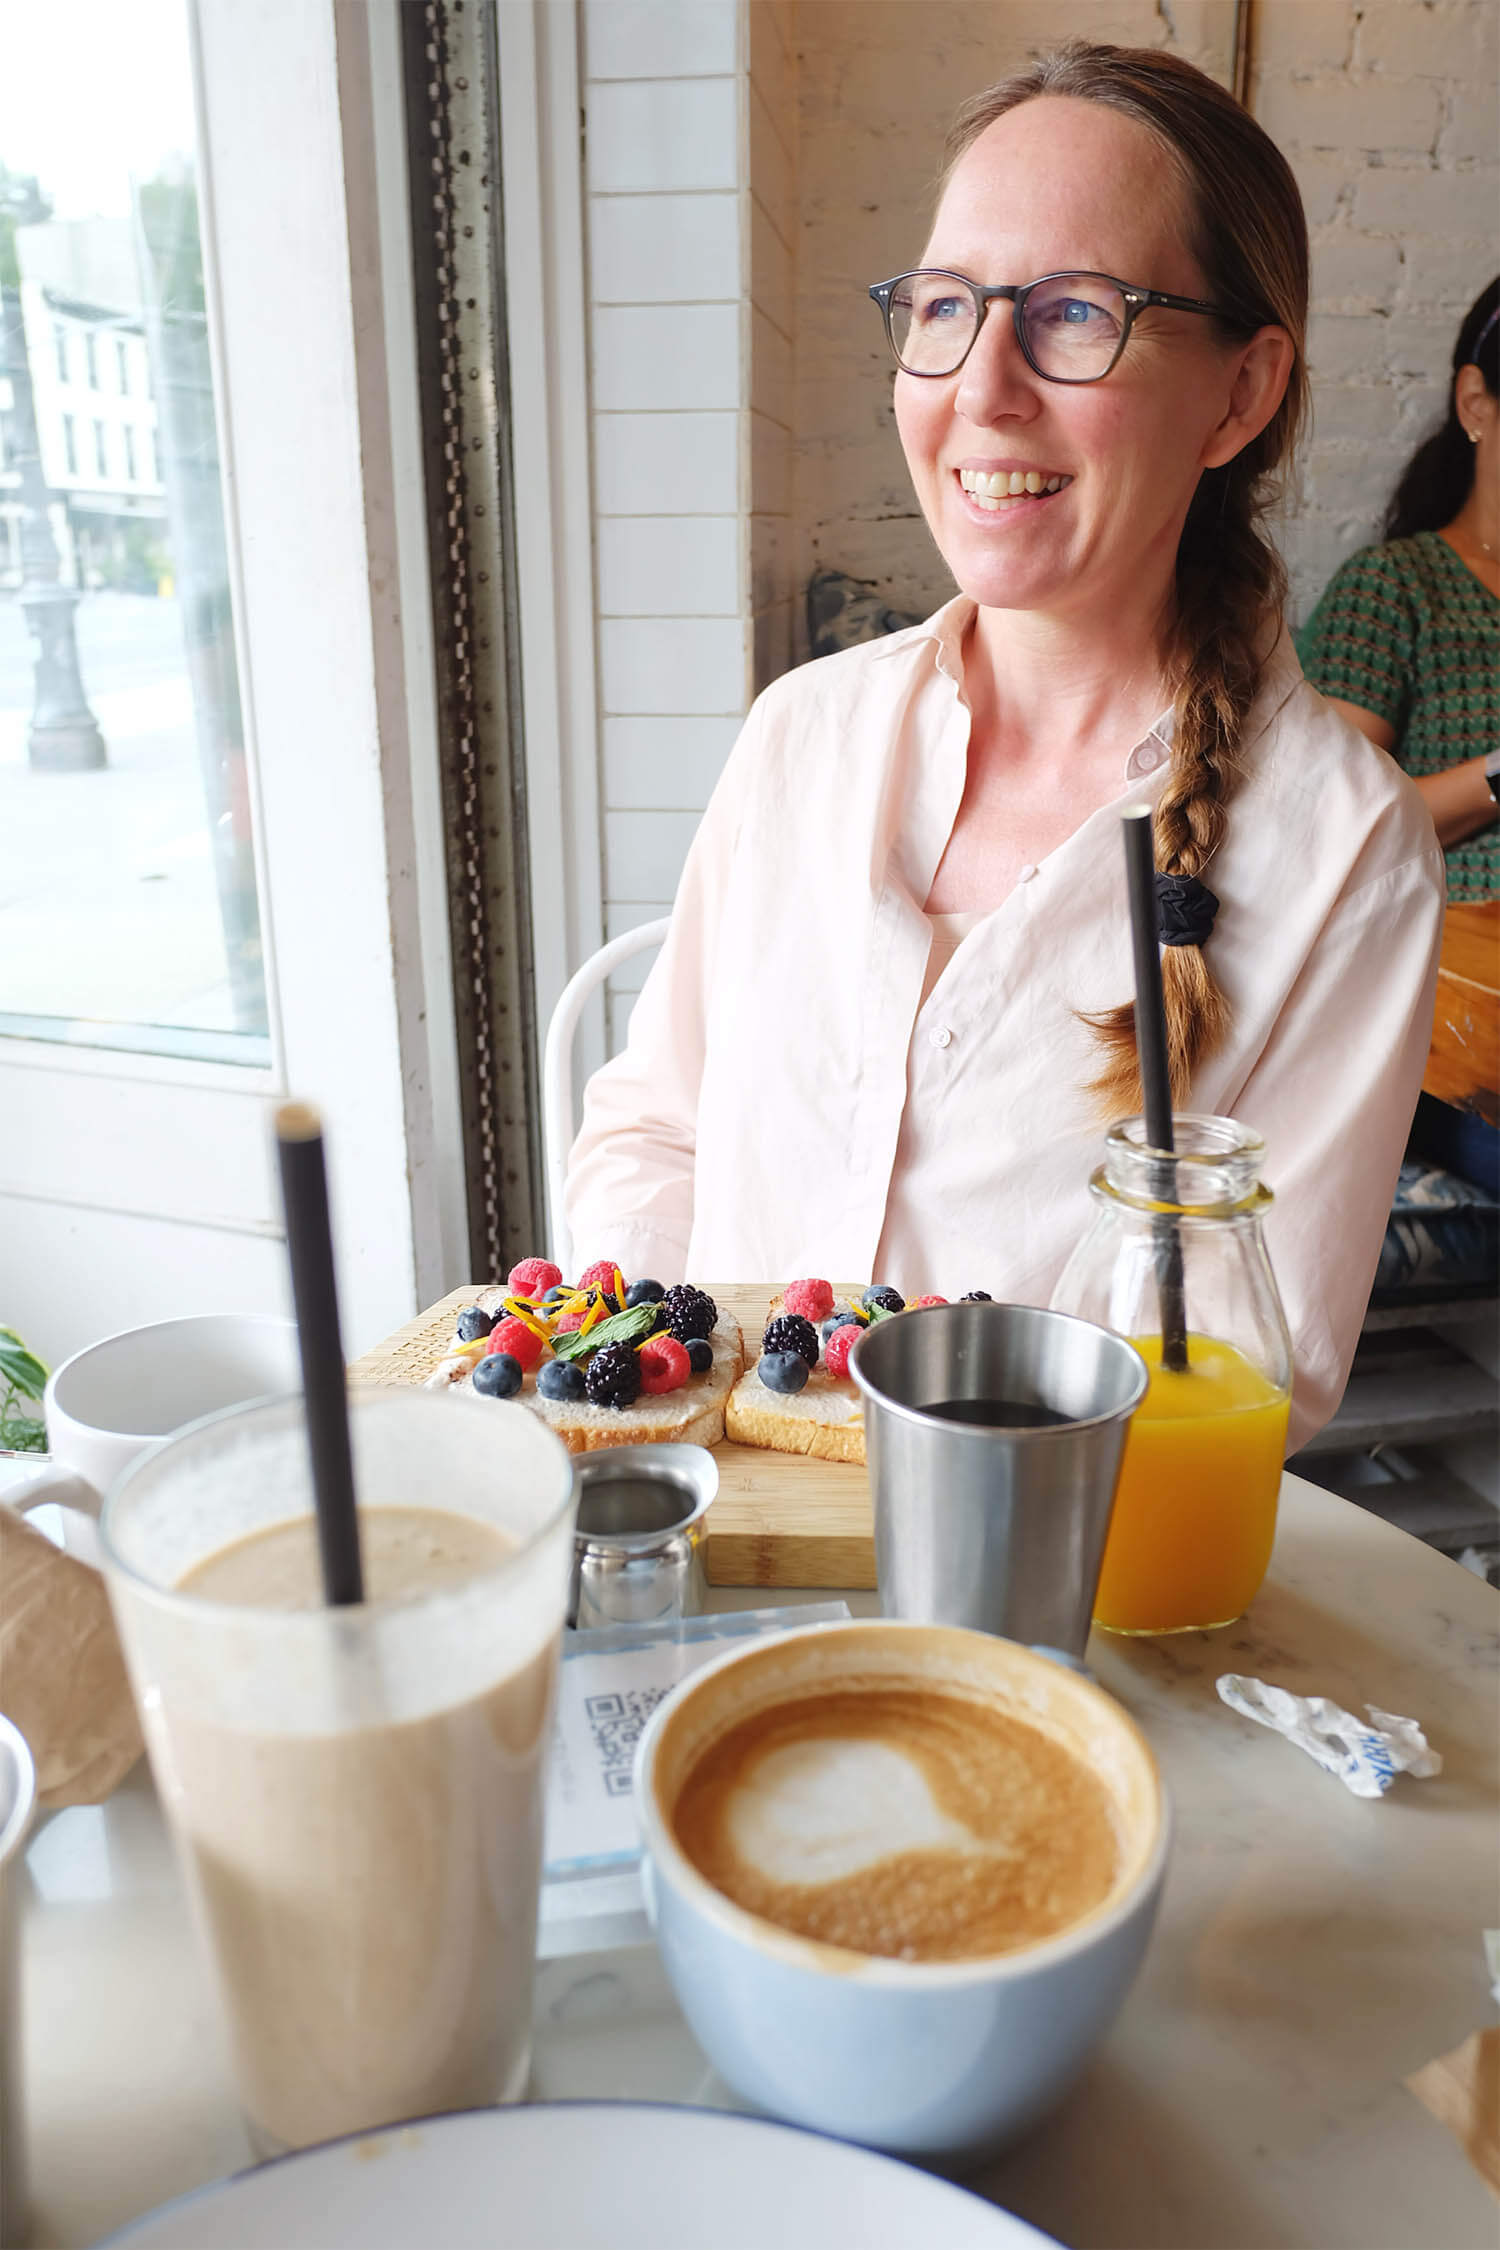 New York City: Brunch at The Butcher's Daughter in West Village